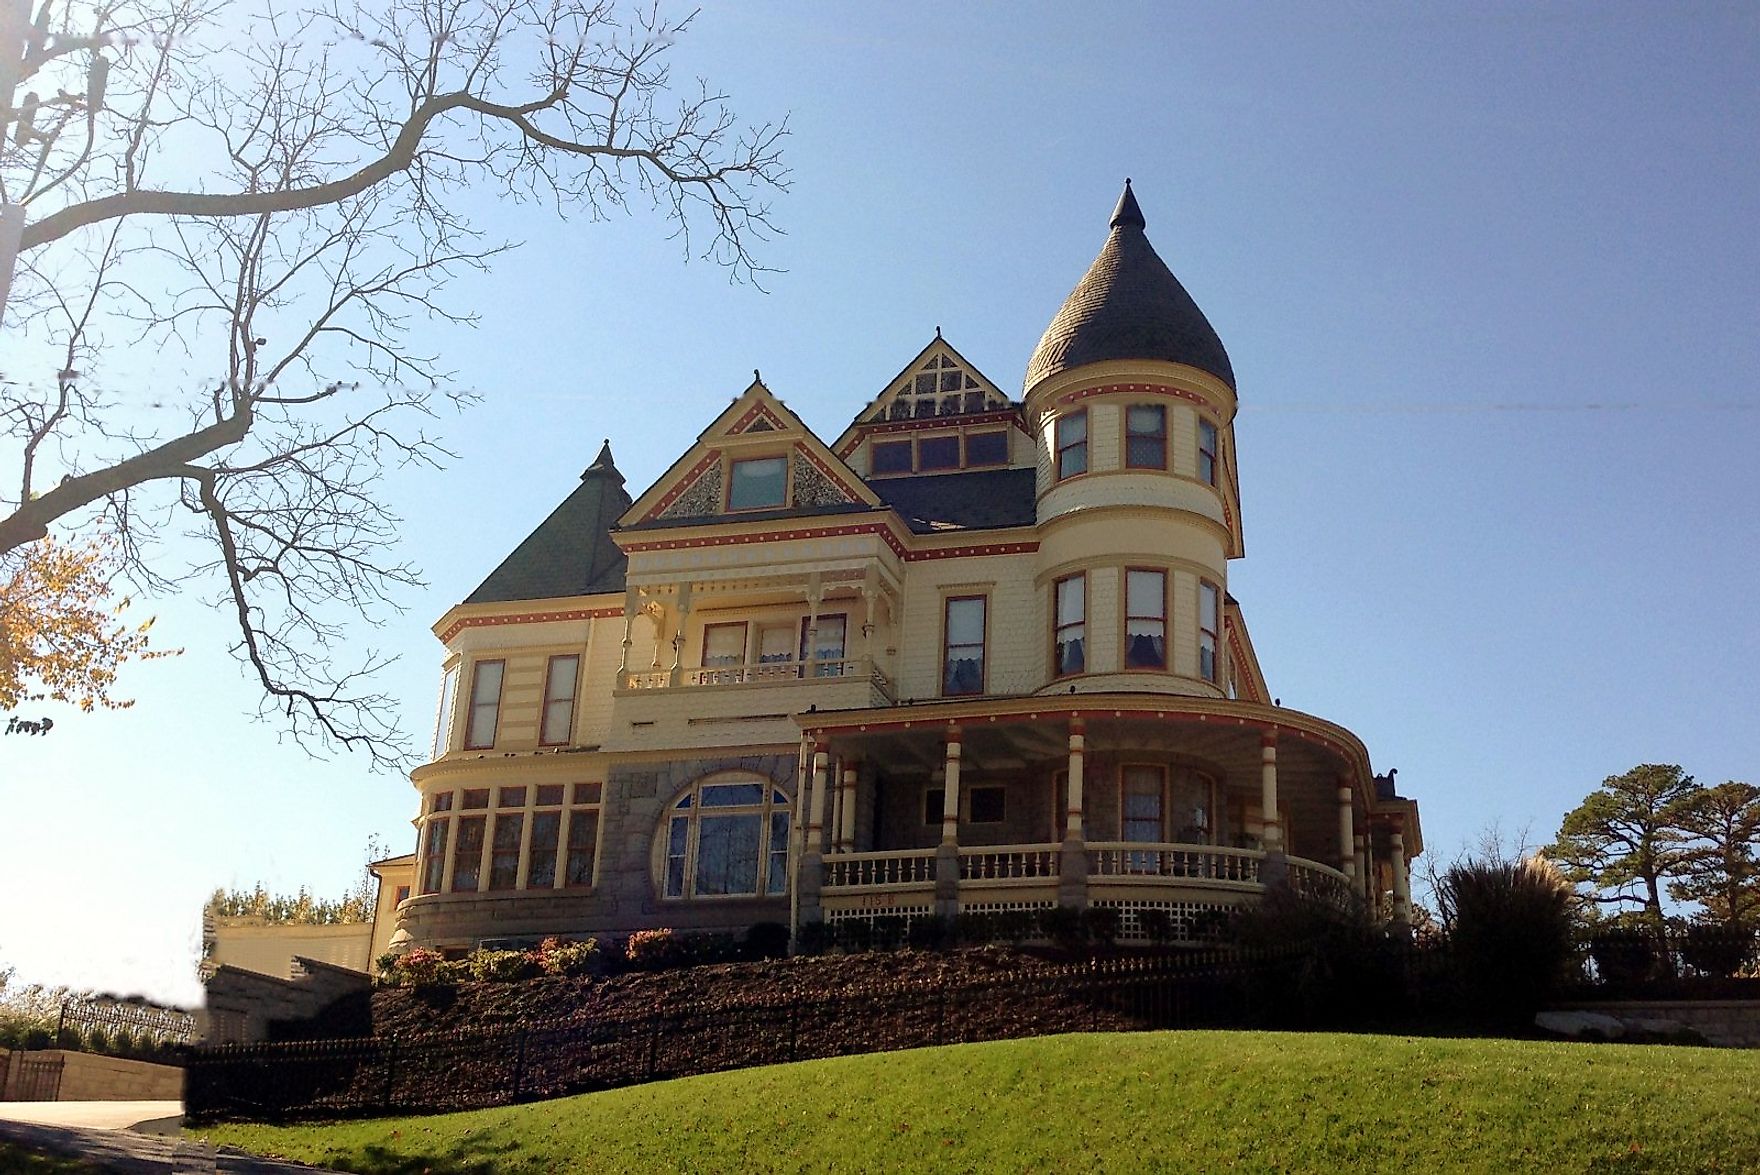 Queen Anne Mansion in Eureka Springs, Arkansas. Image credit Brad Holt, CC BY 2.0 <https://creativecommons.org/licenses/by/2.0>, via Wikimedia Commons